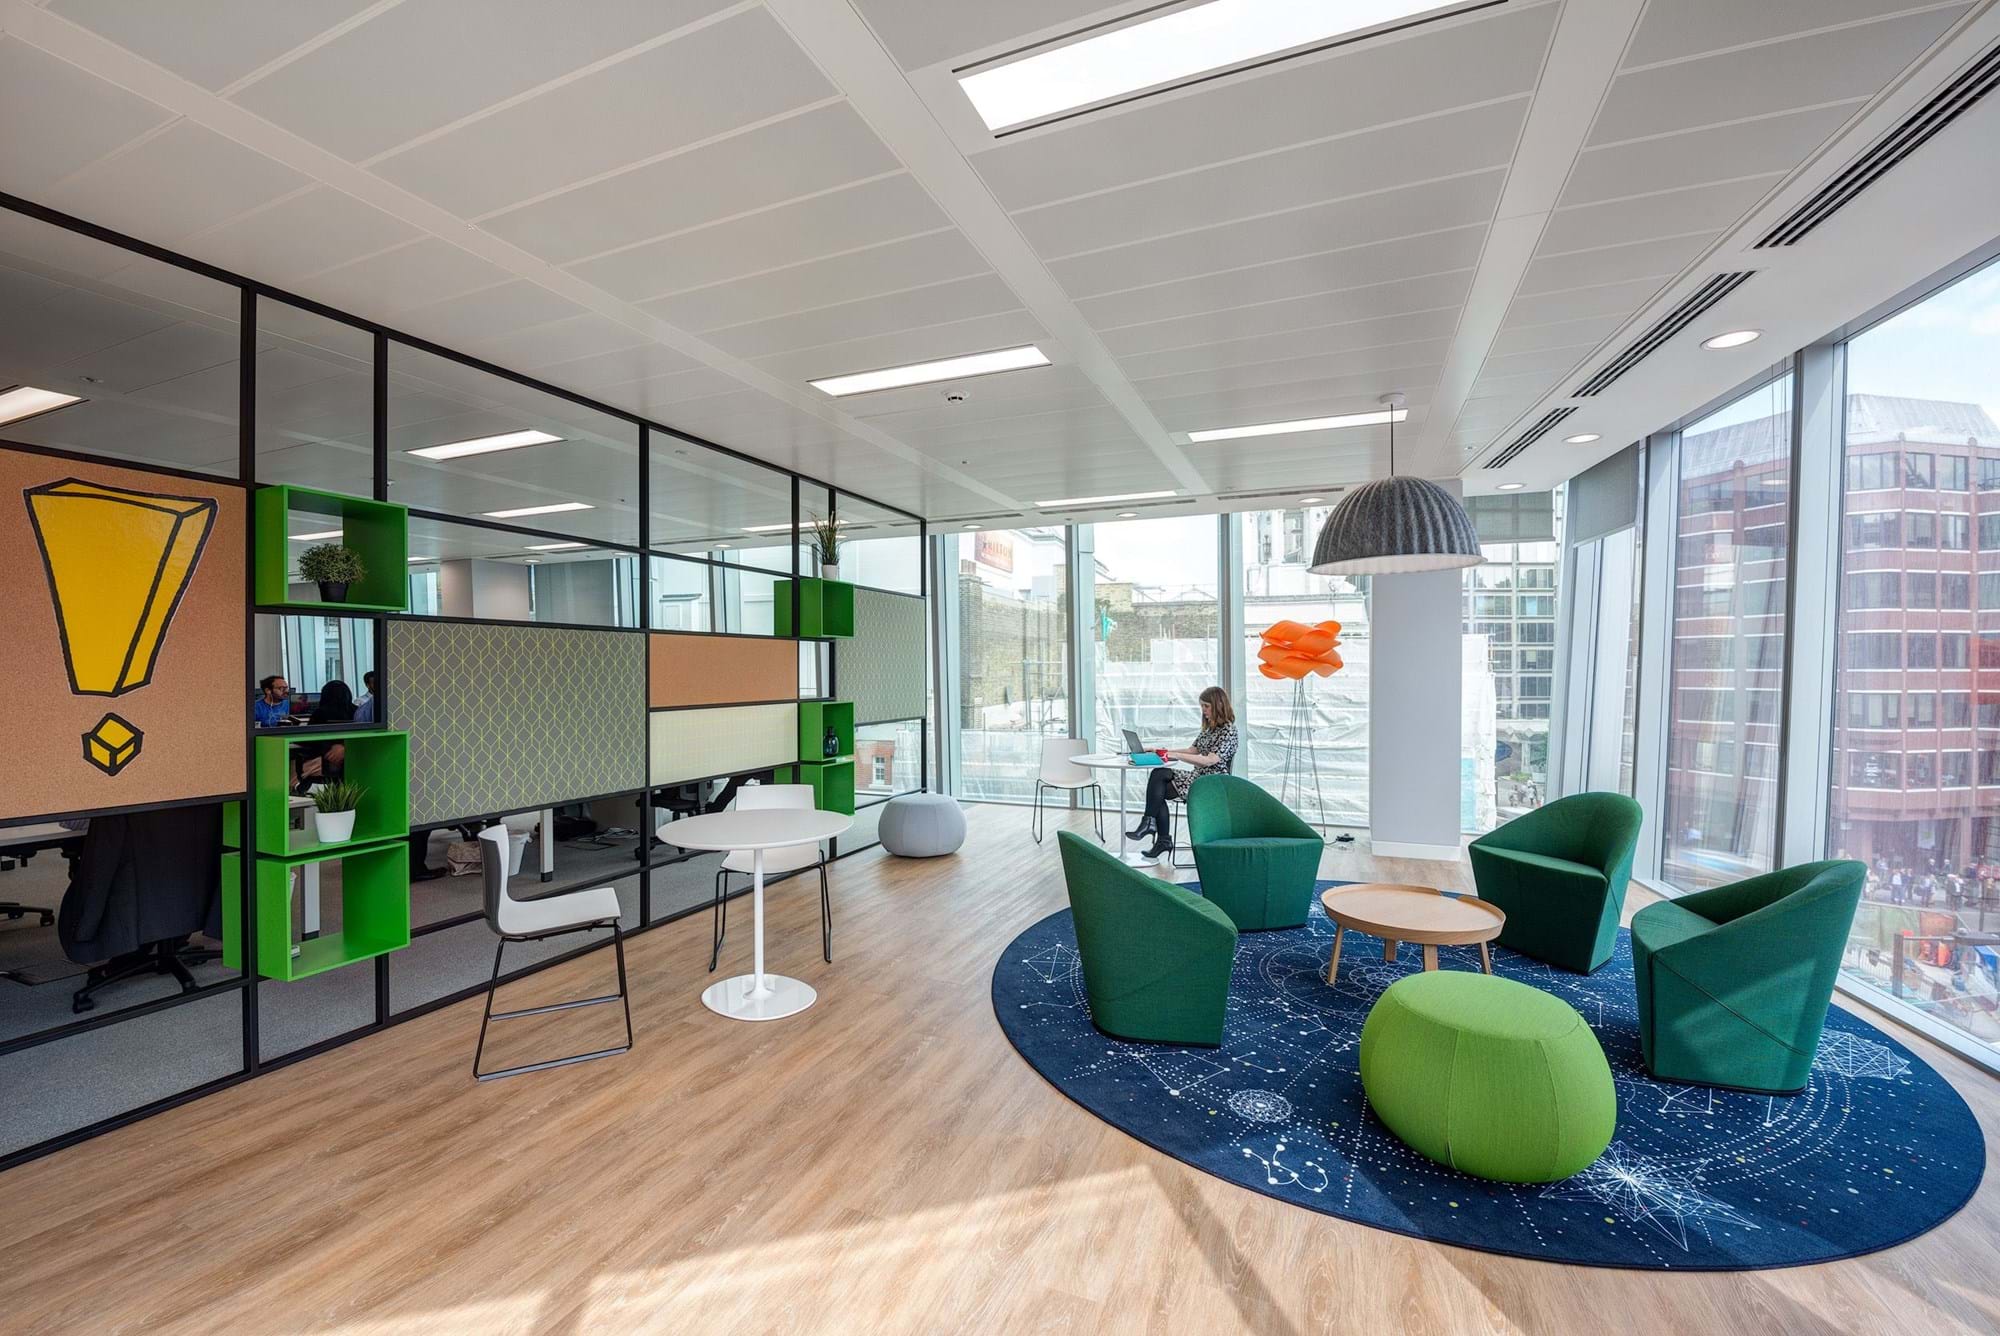 Modus Workspace office design, fit out and refurbishment - Reply - Reply 09 highres sRGB.jpg